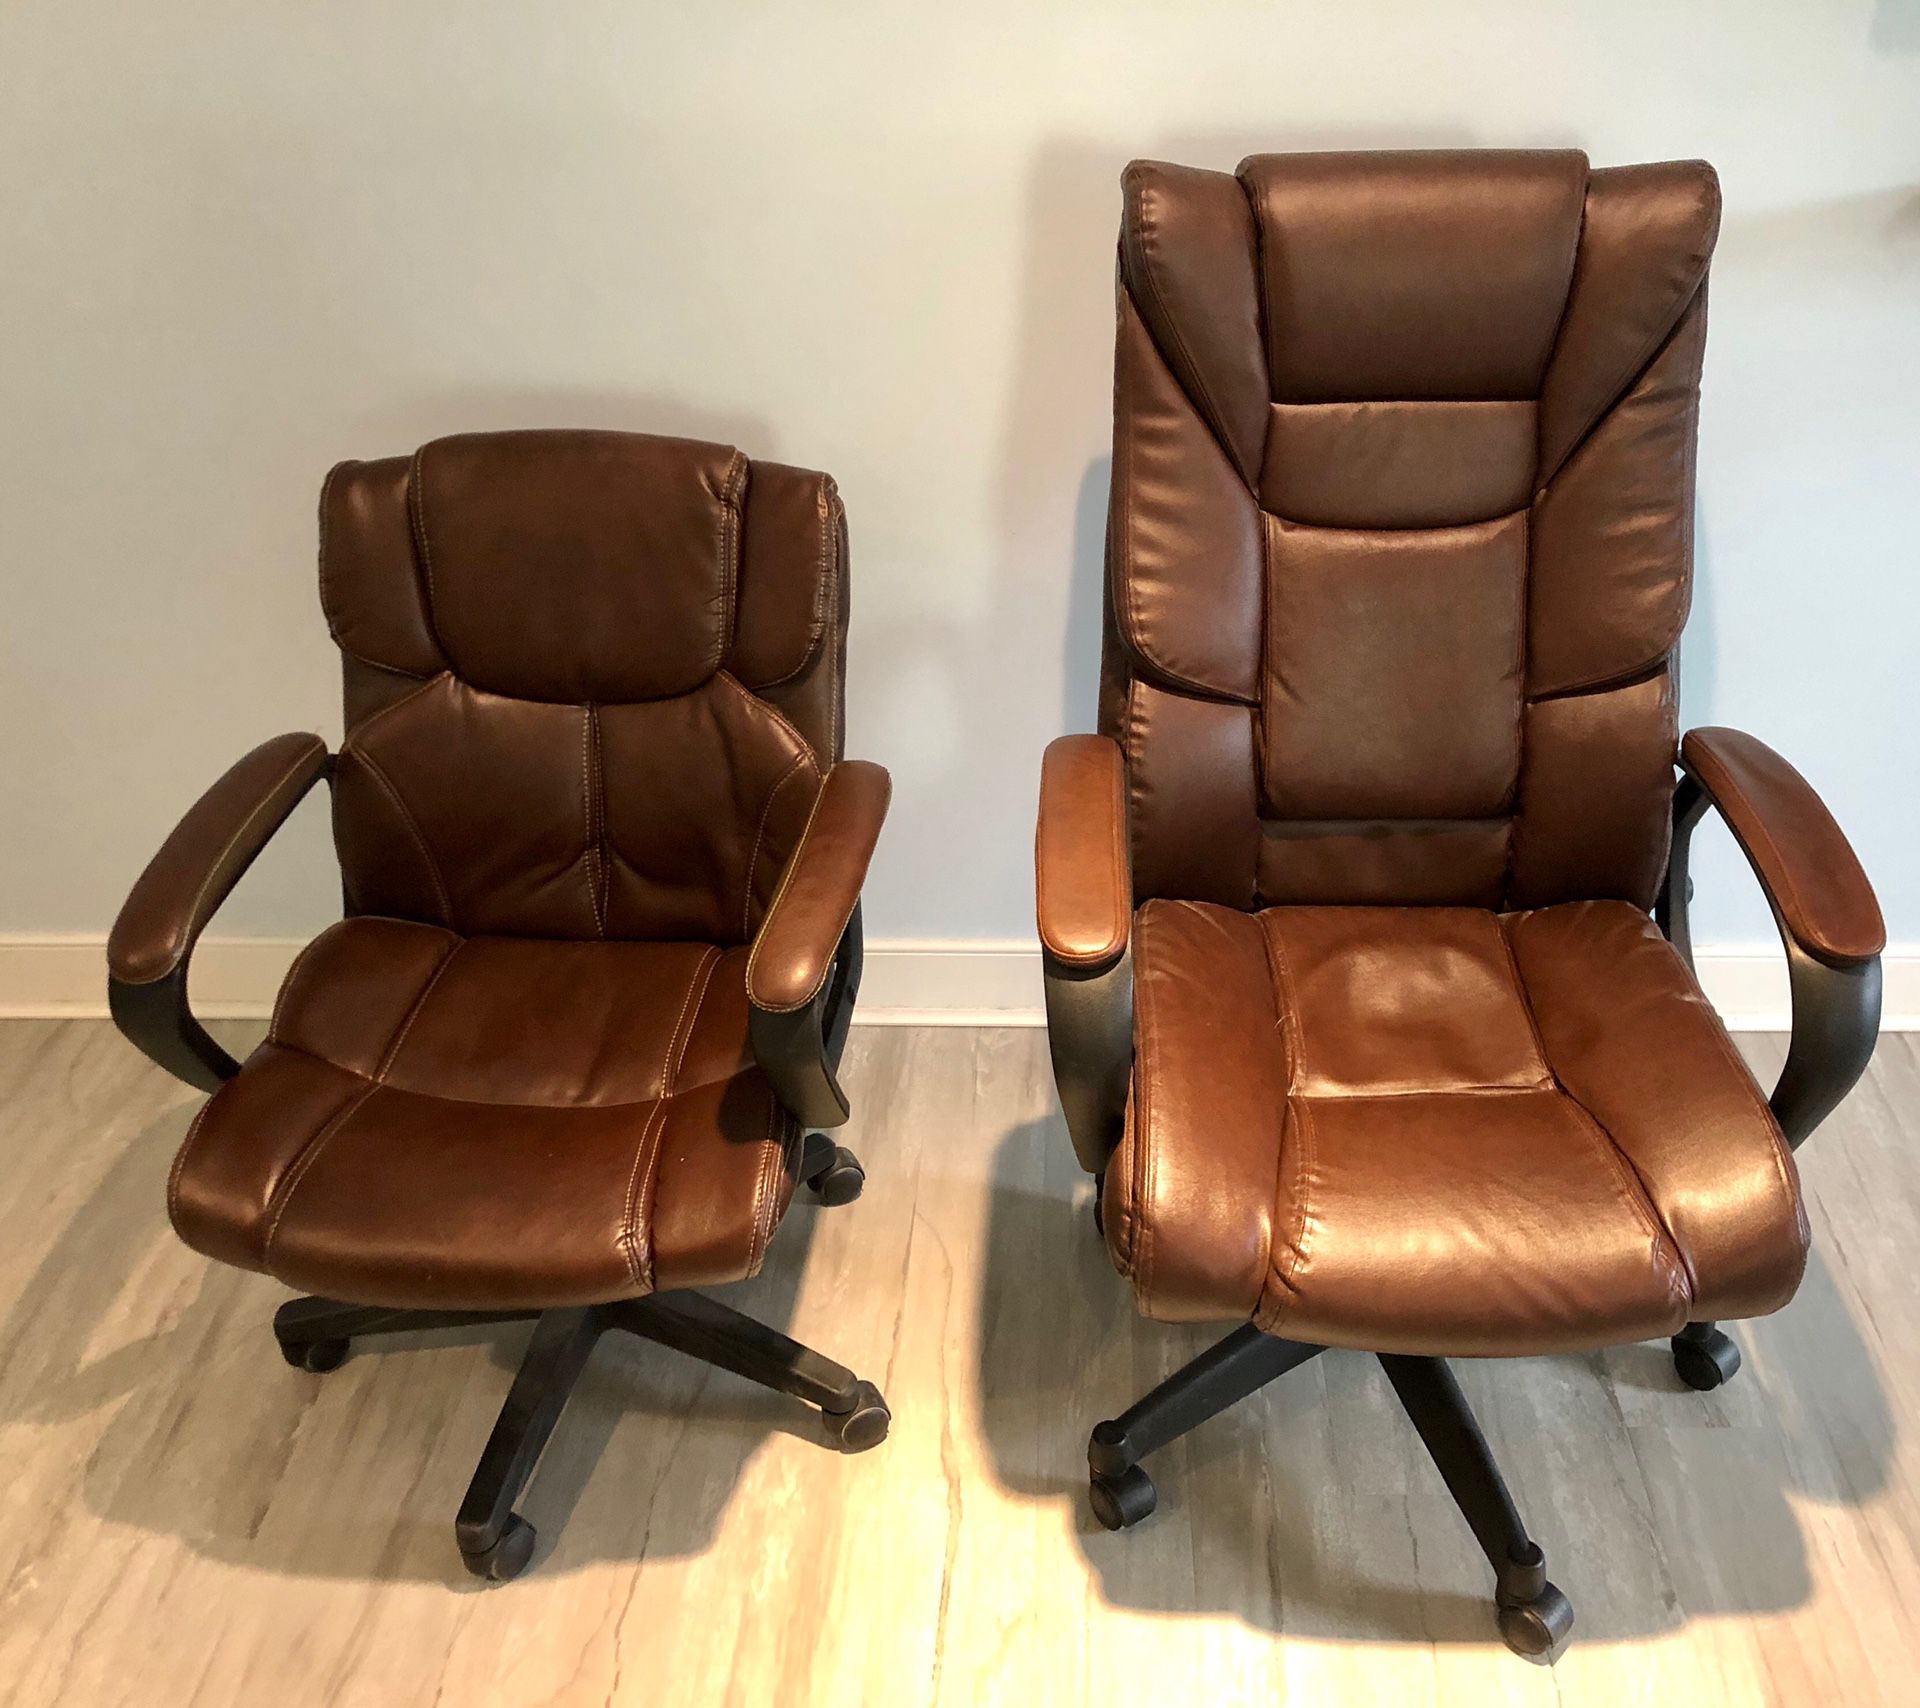 Leather Office Chair(s) - $30 each